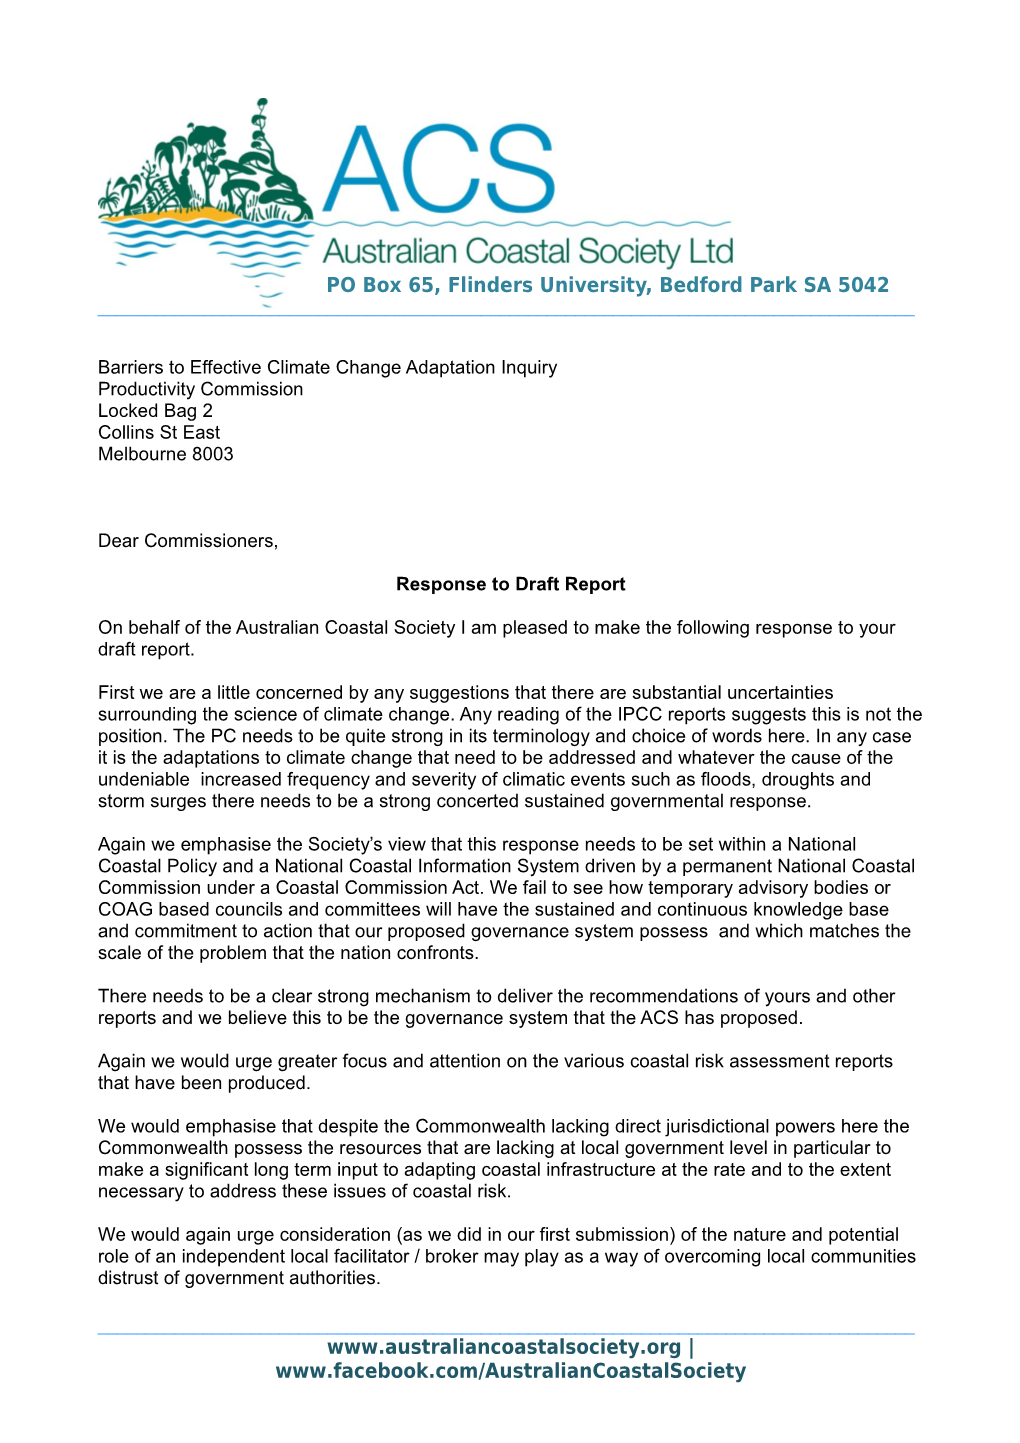 Submission DR123 - Australian Coastal Society - Barriers to Effective Climate Change Adaptation